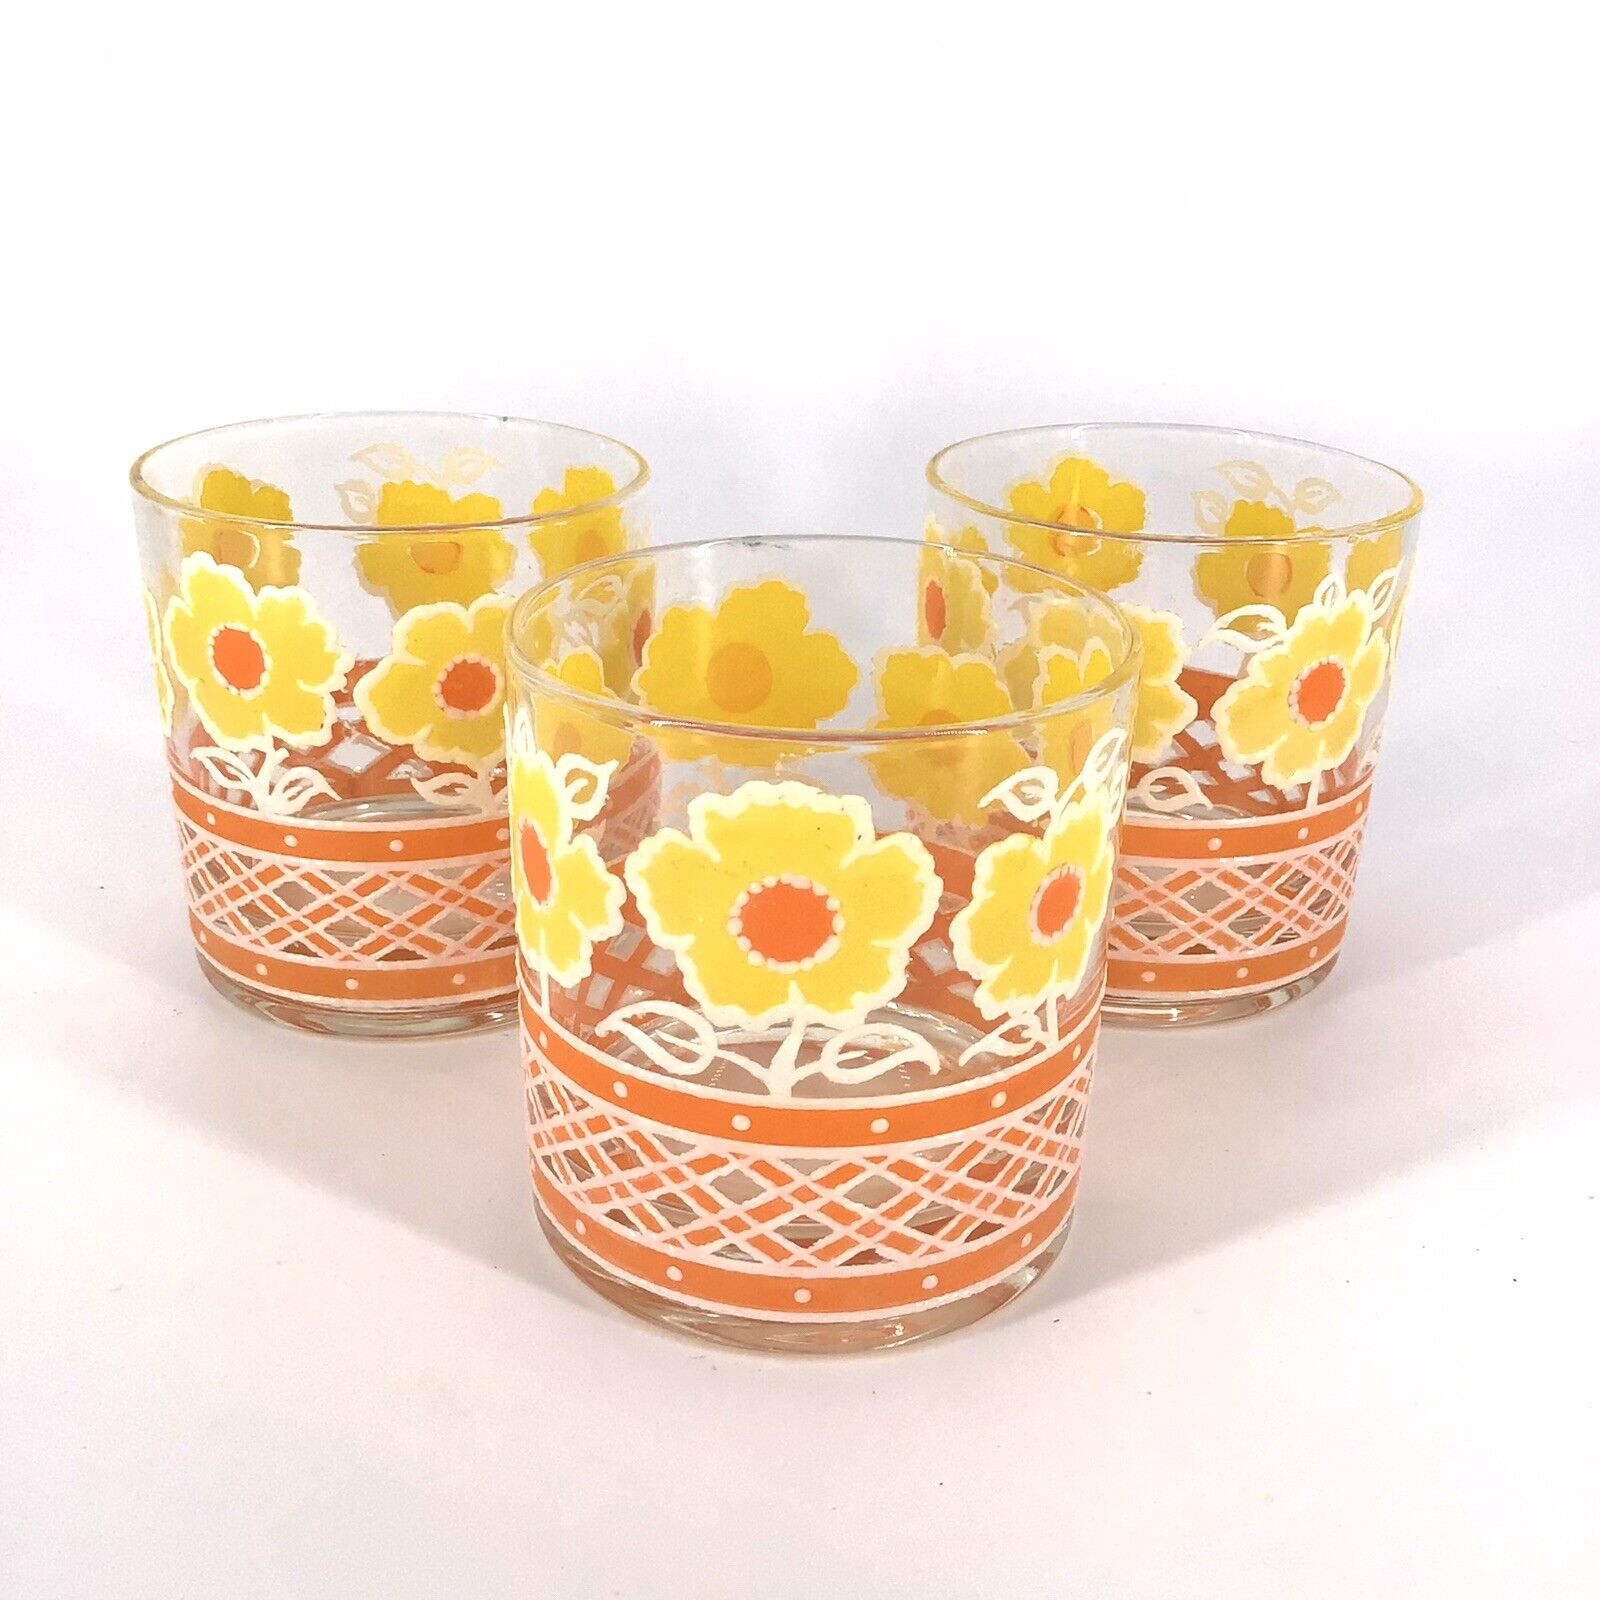 Culver Daisy Low Ball Glasses Signed Set of 3 Rocks Old Fashion Vintage